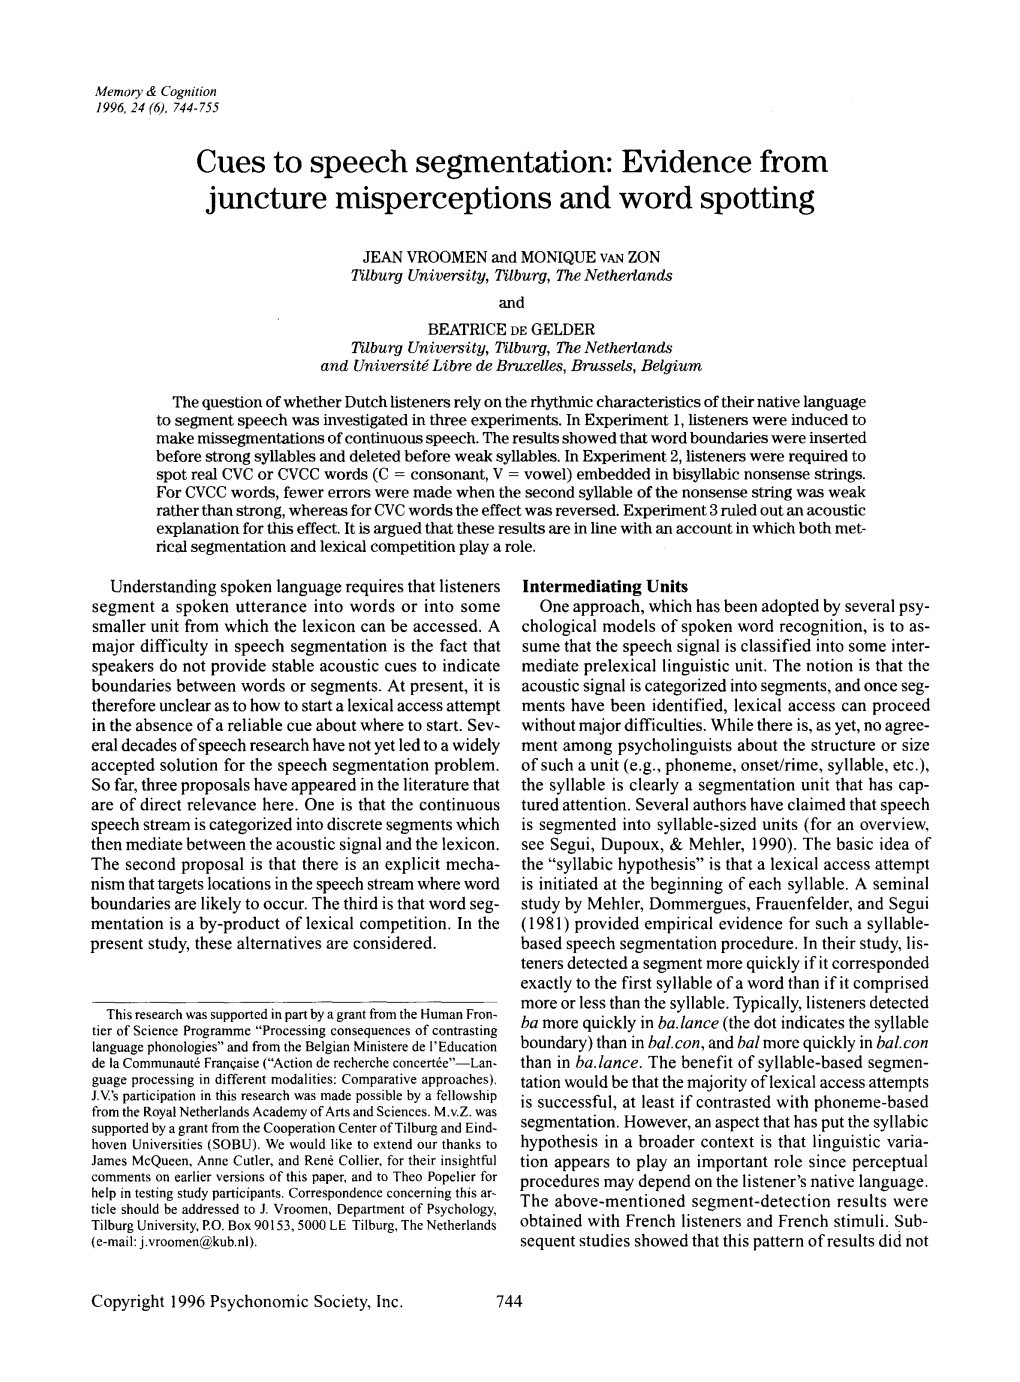 Cues to Speech Segmentation: Evidence from Juncture Misperceptions and Word Spotting